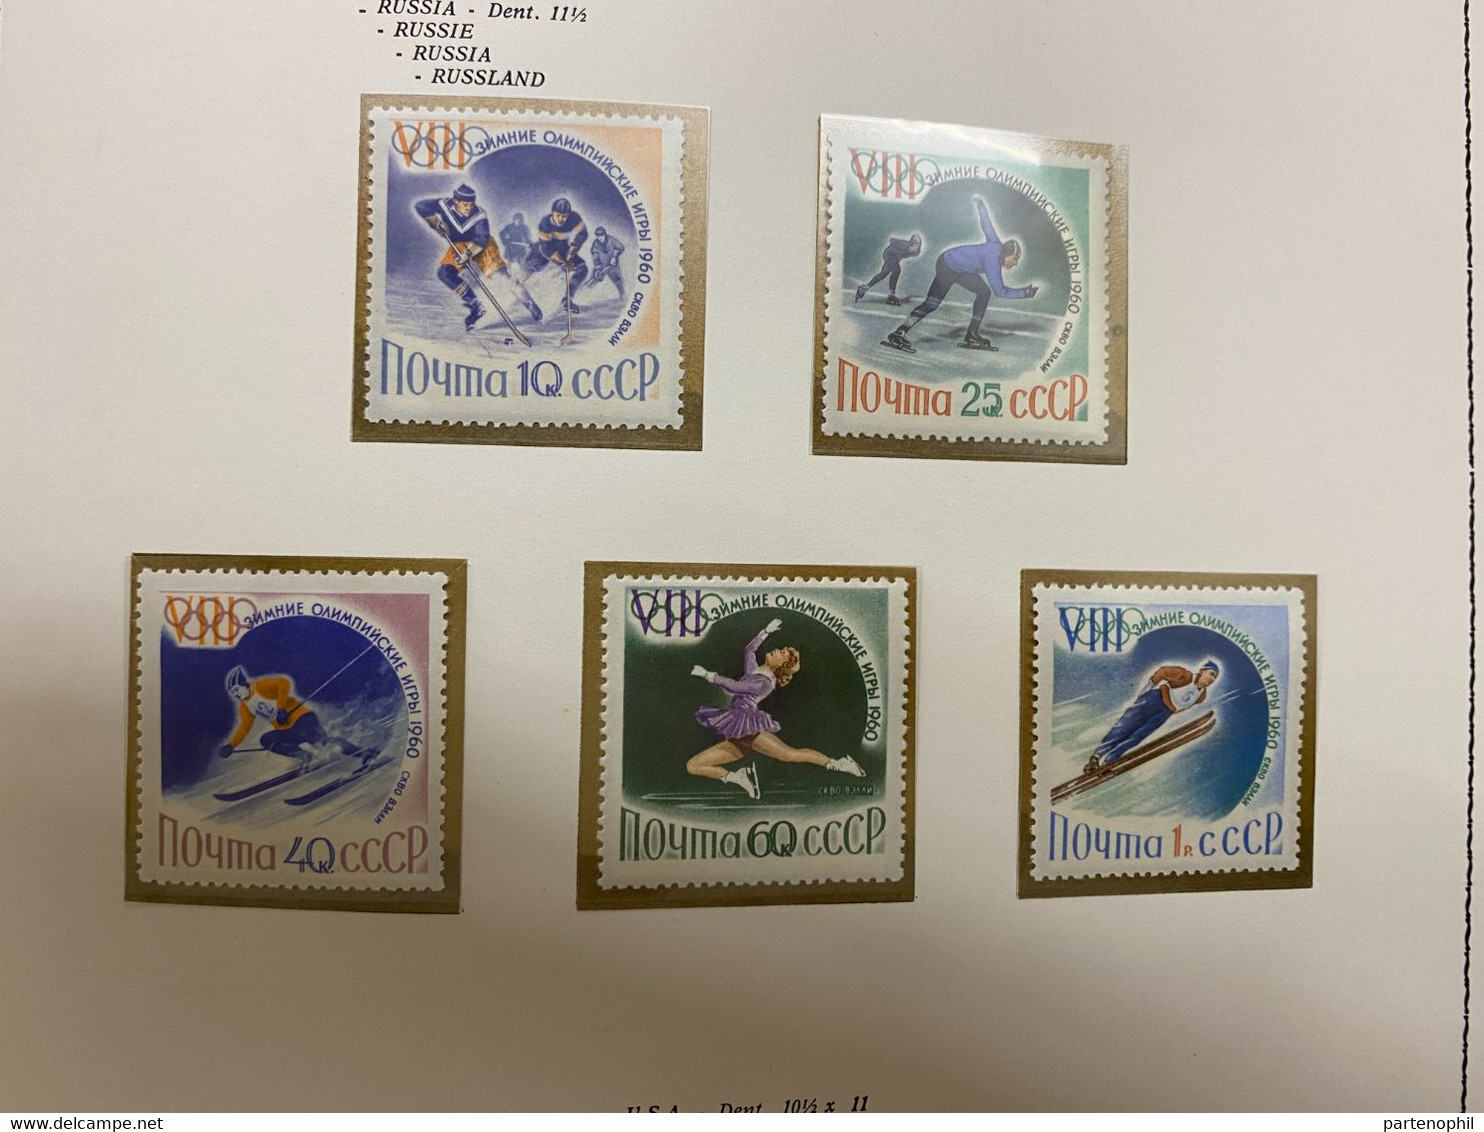 Russia - Squaw Valley 1960 - Winter Olimpic Games / Sports / Giochi Olimpici - Set MNH - Invierno 1960: Squaw Valley